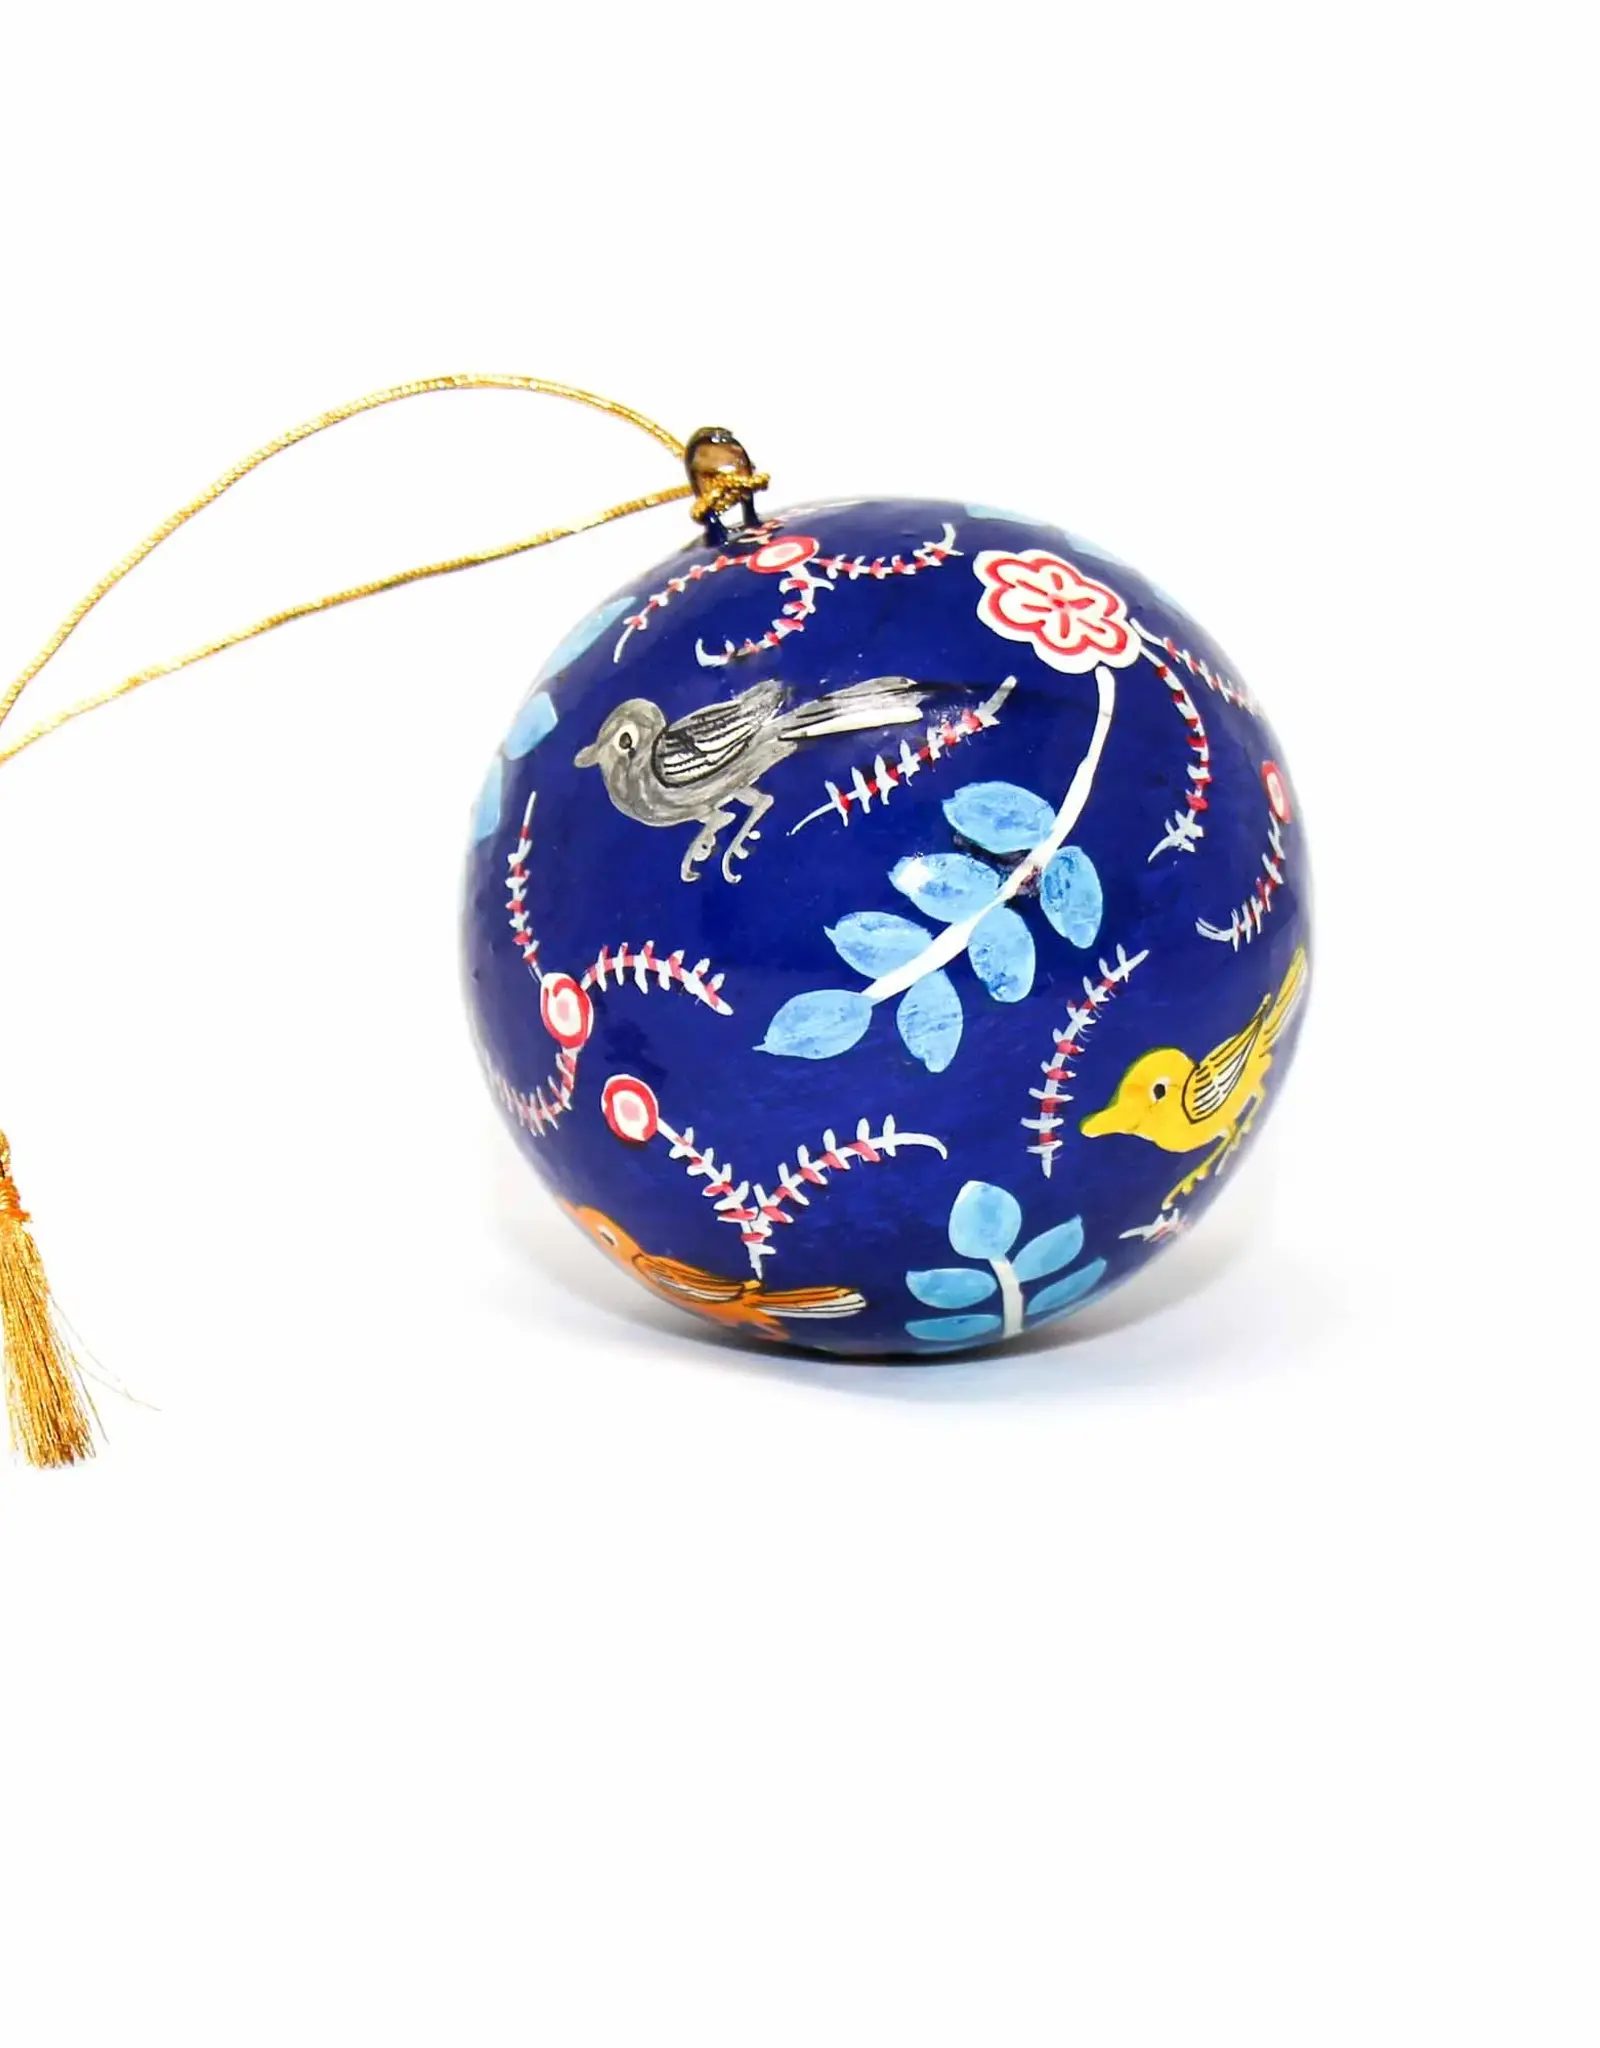 India Ornament Handpainted Birds and Flowers Blue - India